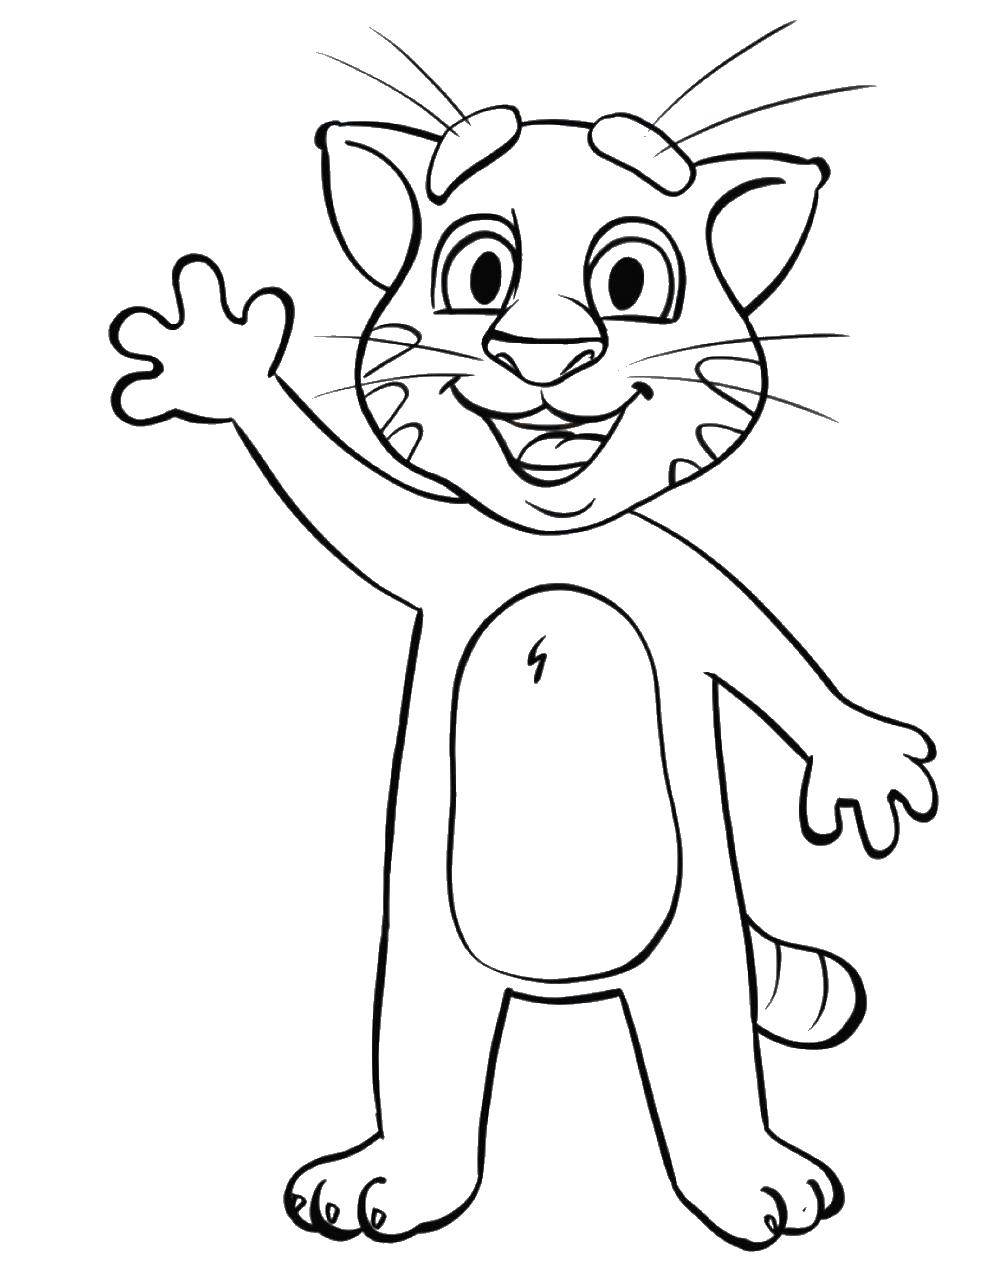 Coloring Tom waved his hand. Category coloring. Tags:  games, Tom, cat.